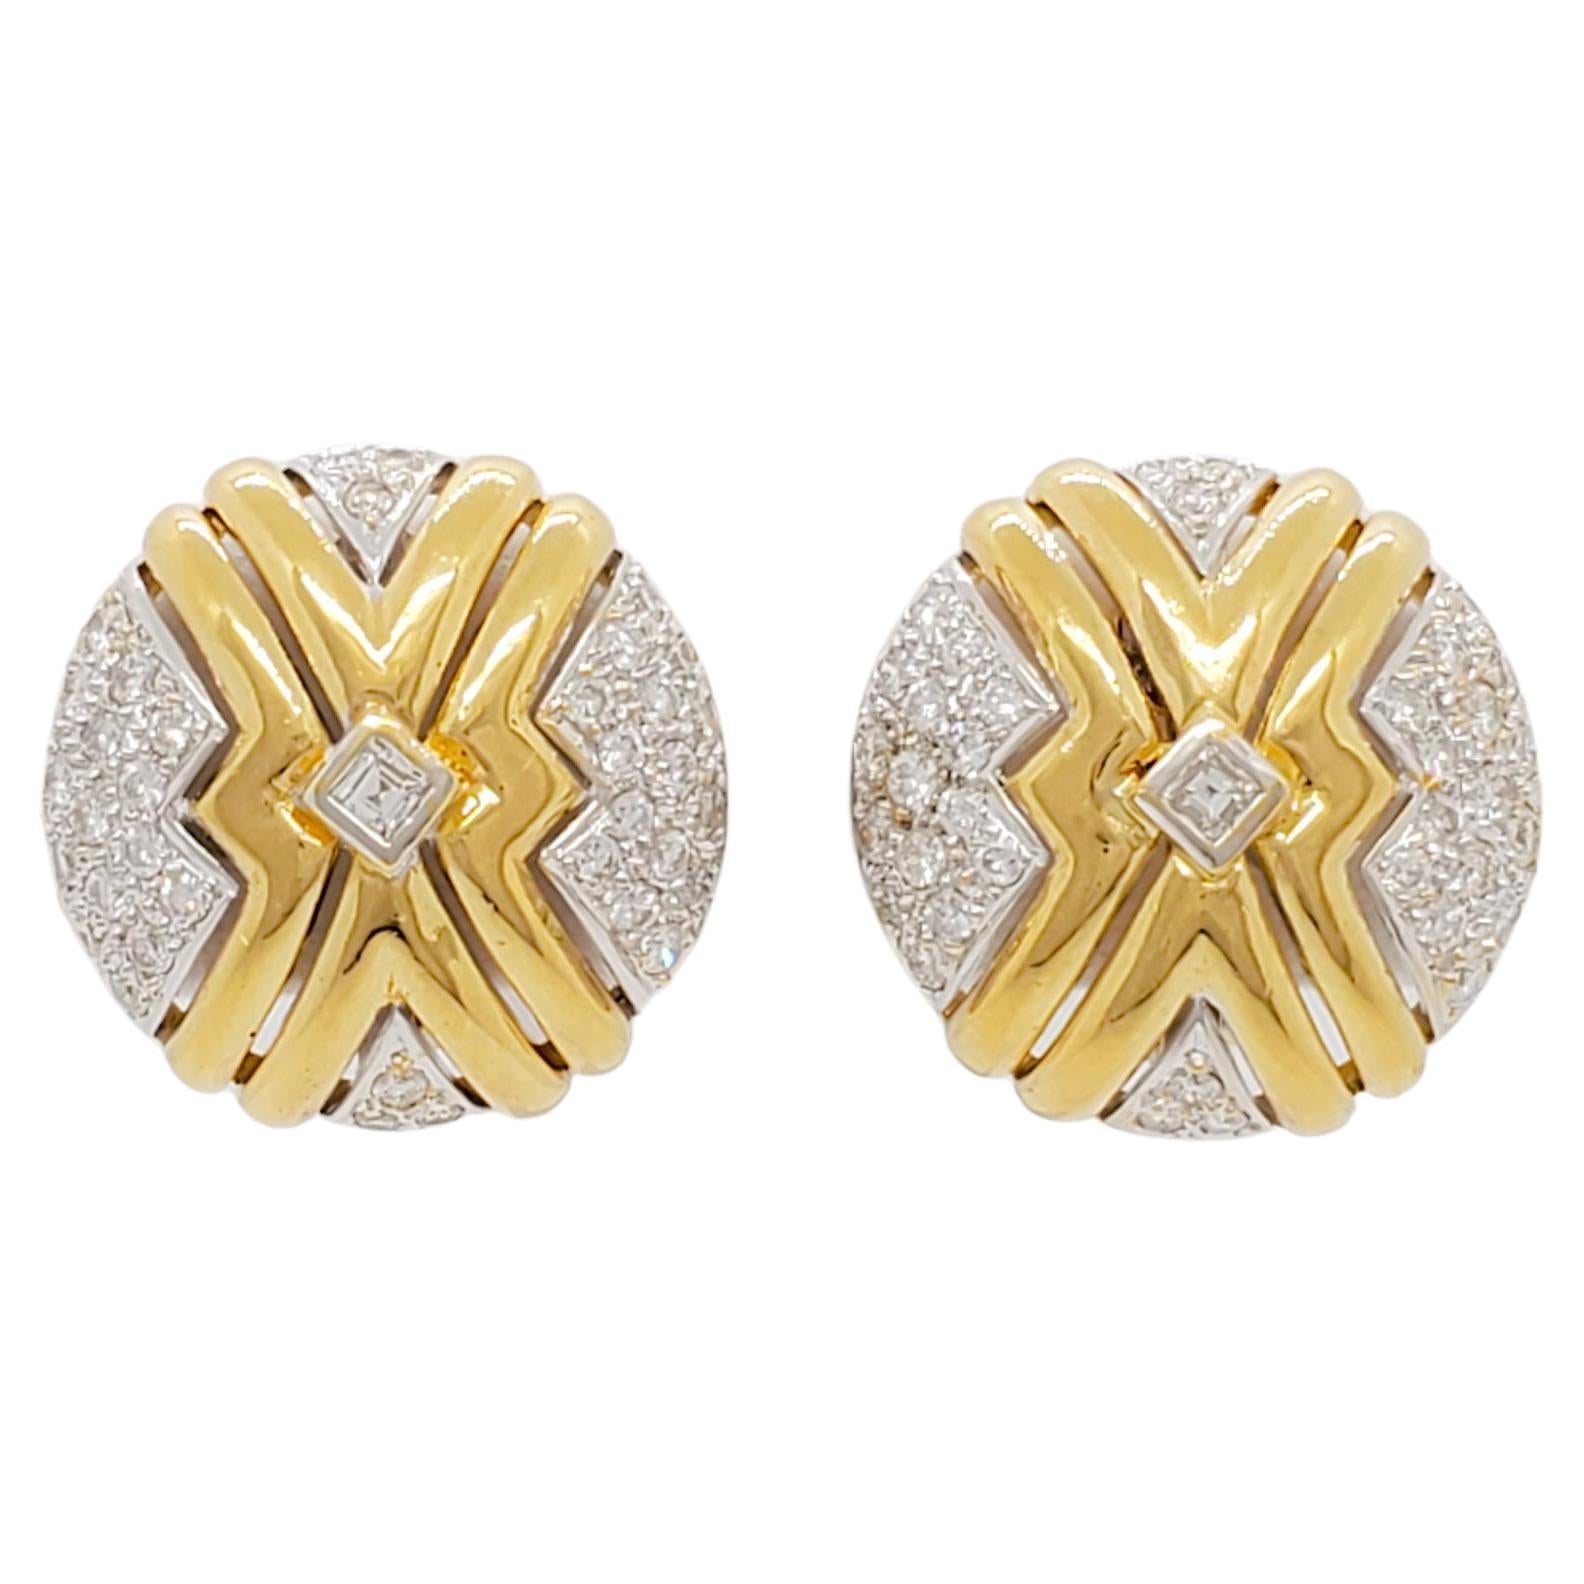 White Diamond Earring Clips in 18k Two Tone Gold For Sale